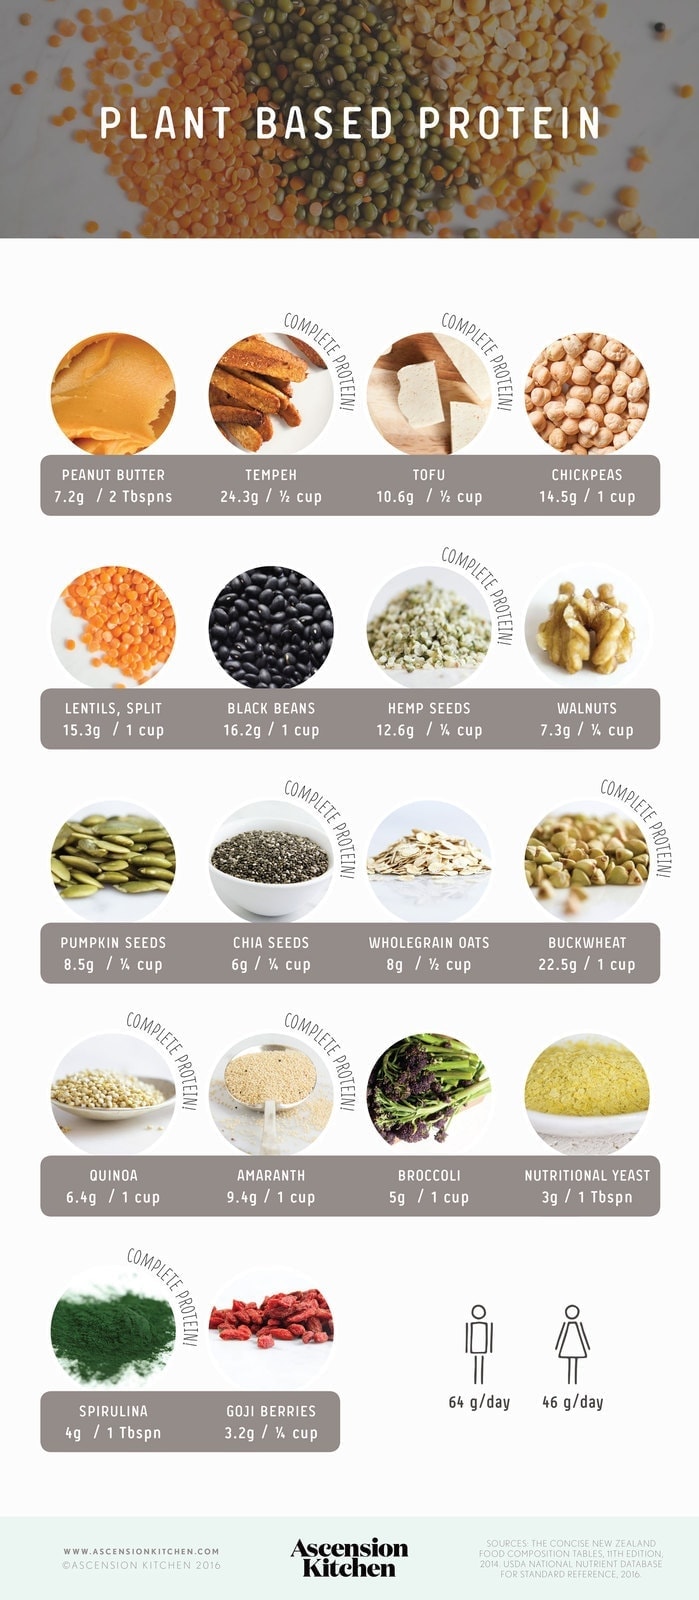 Plant Based Sources of Protein